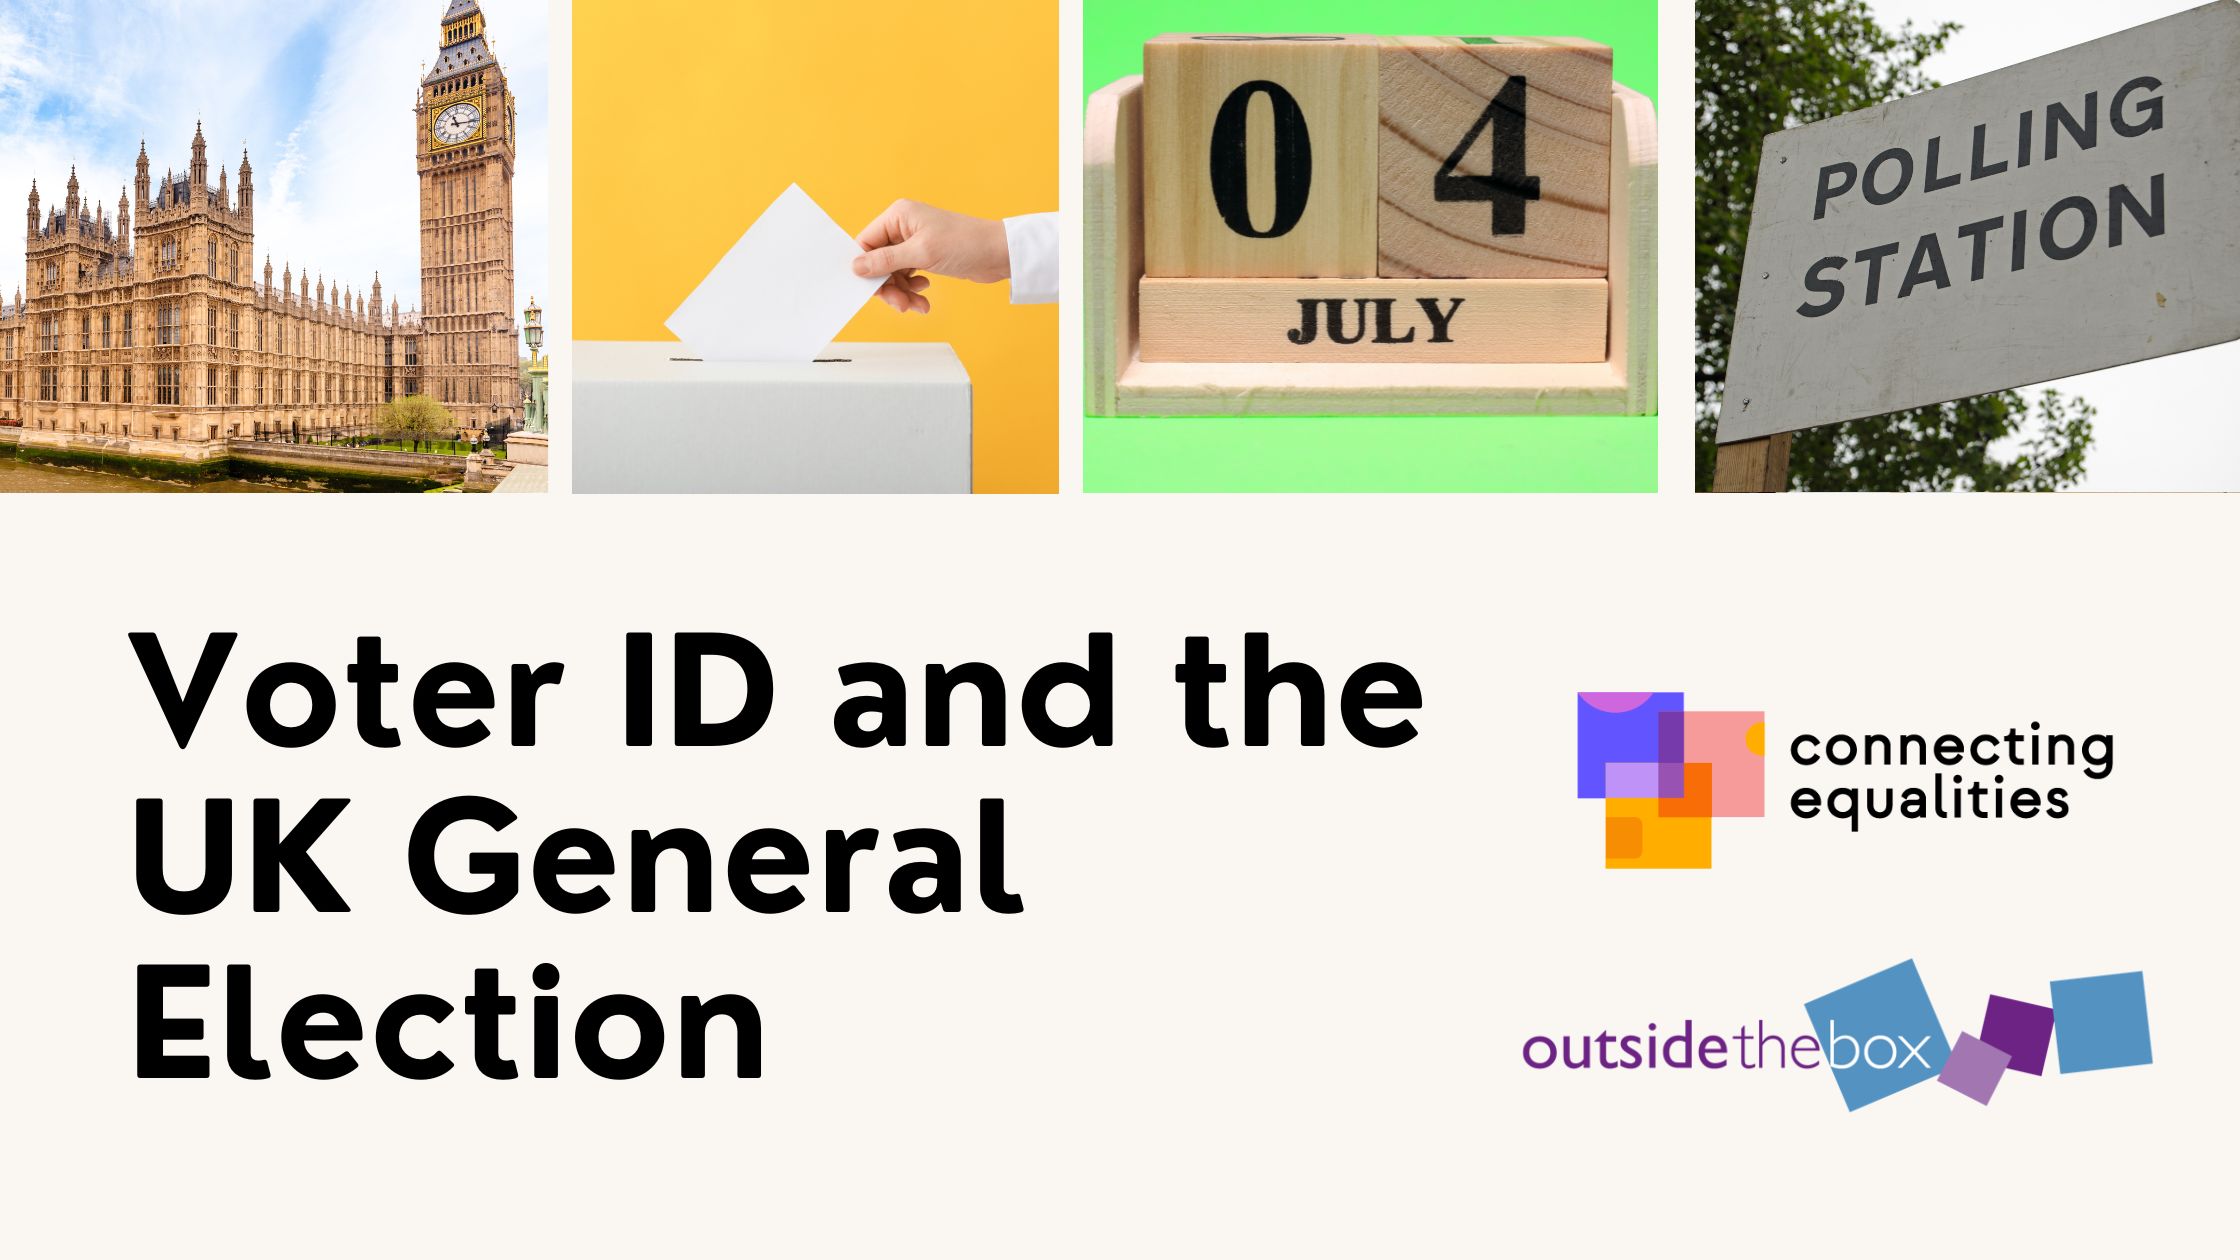 Voter ID and the UK General Election